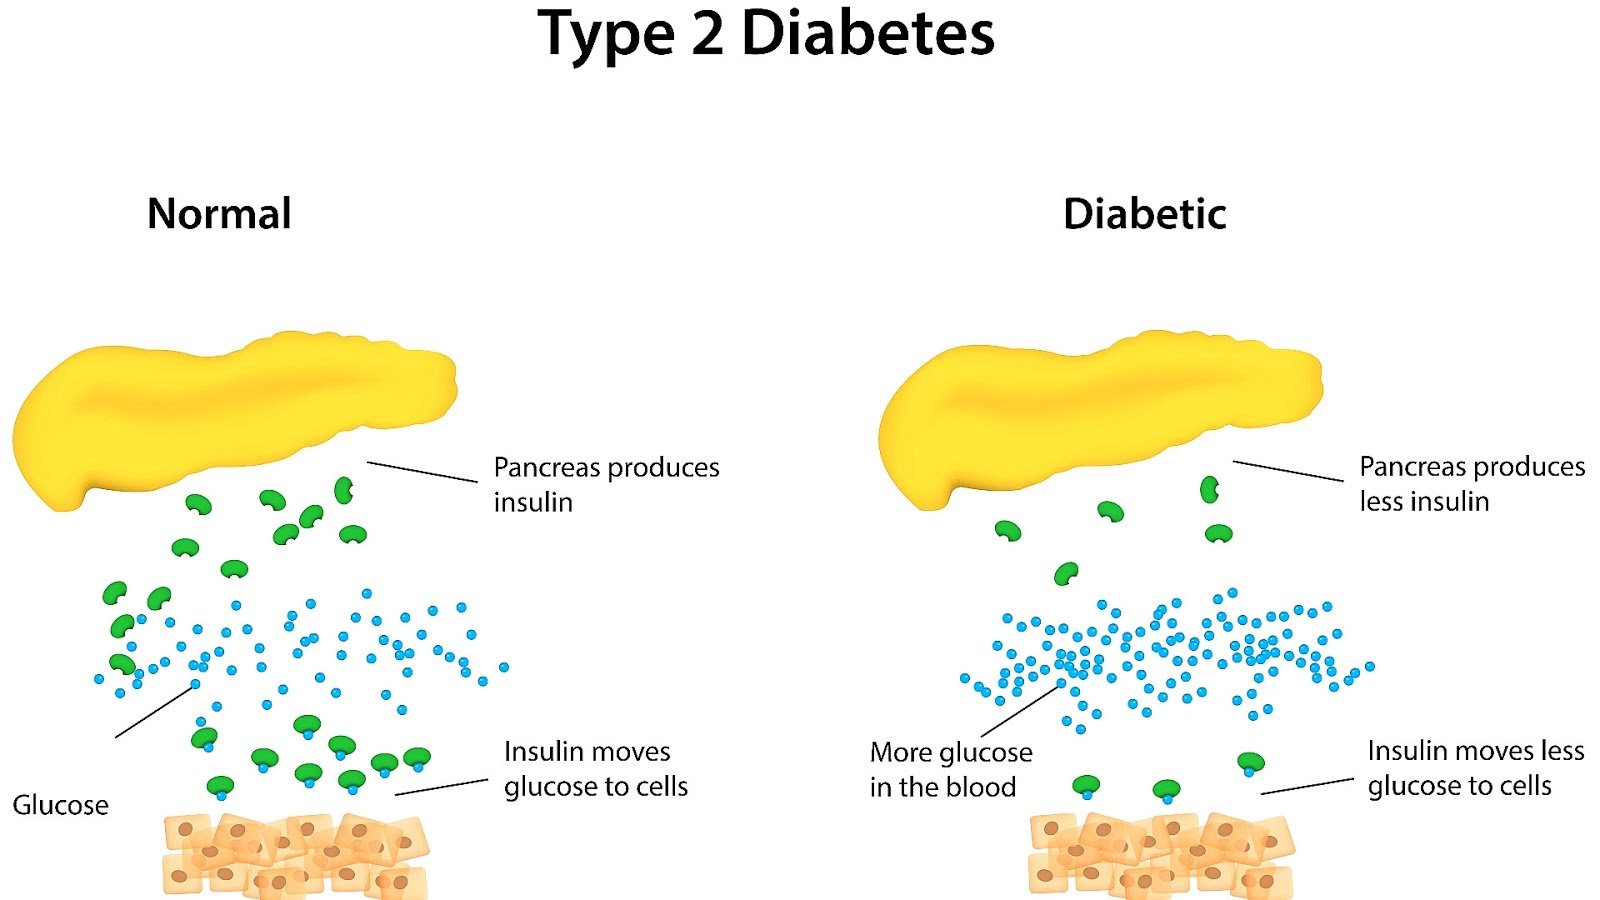 How Does Type 2 Diabetes Occur